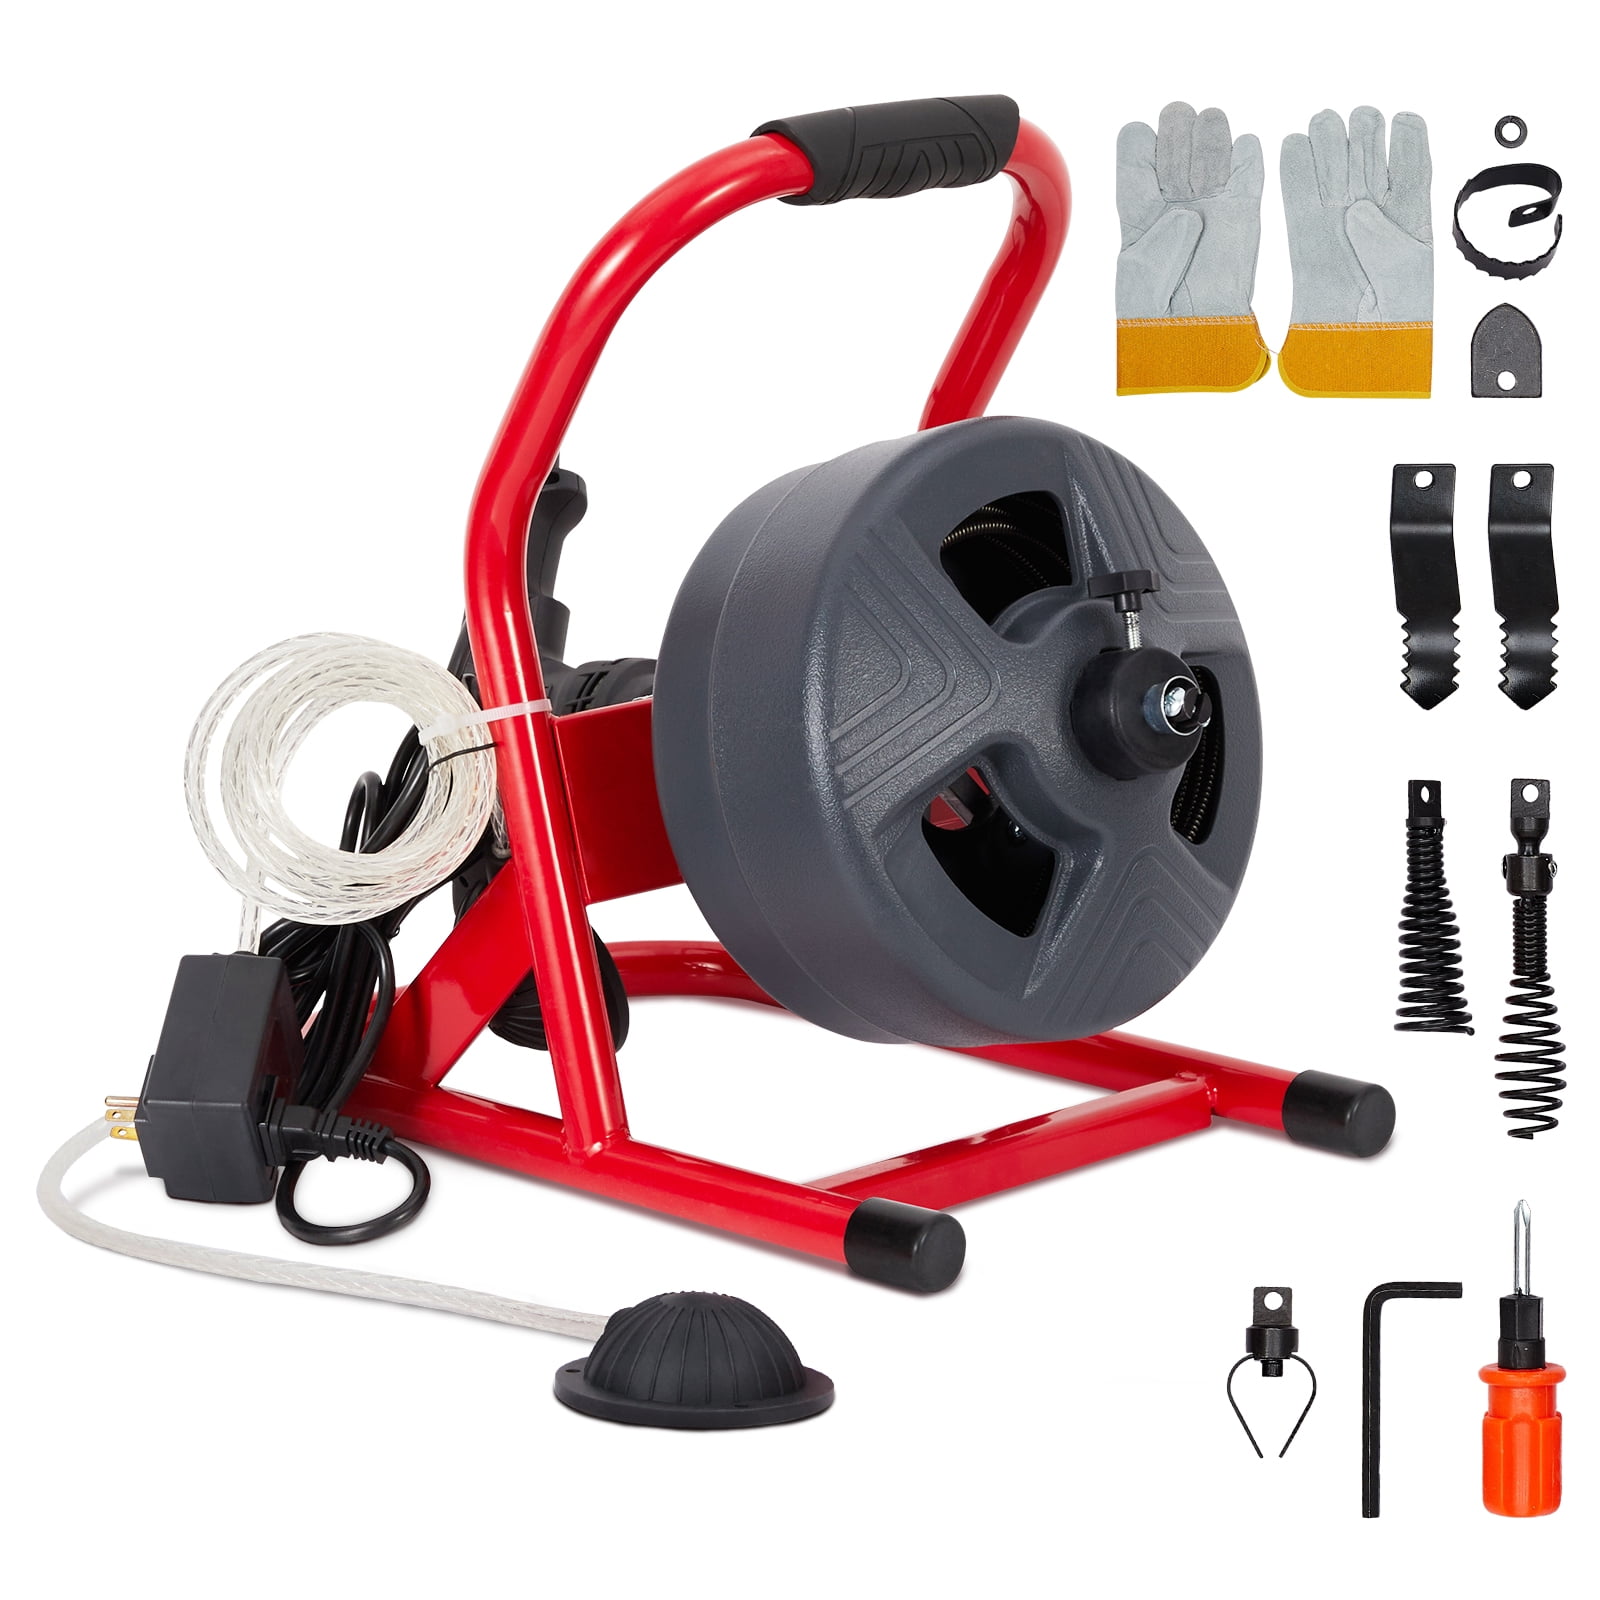 50Ft x 5/16 Inch Drain Cleaner Machine, Electric Drain Auger Professional  for 3/4 to 3 Inch Pipes, Foot Switch with 6 Cutters, Glove, Drain Auger  Cleaner Sewer Snake - DA04 